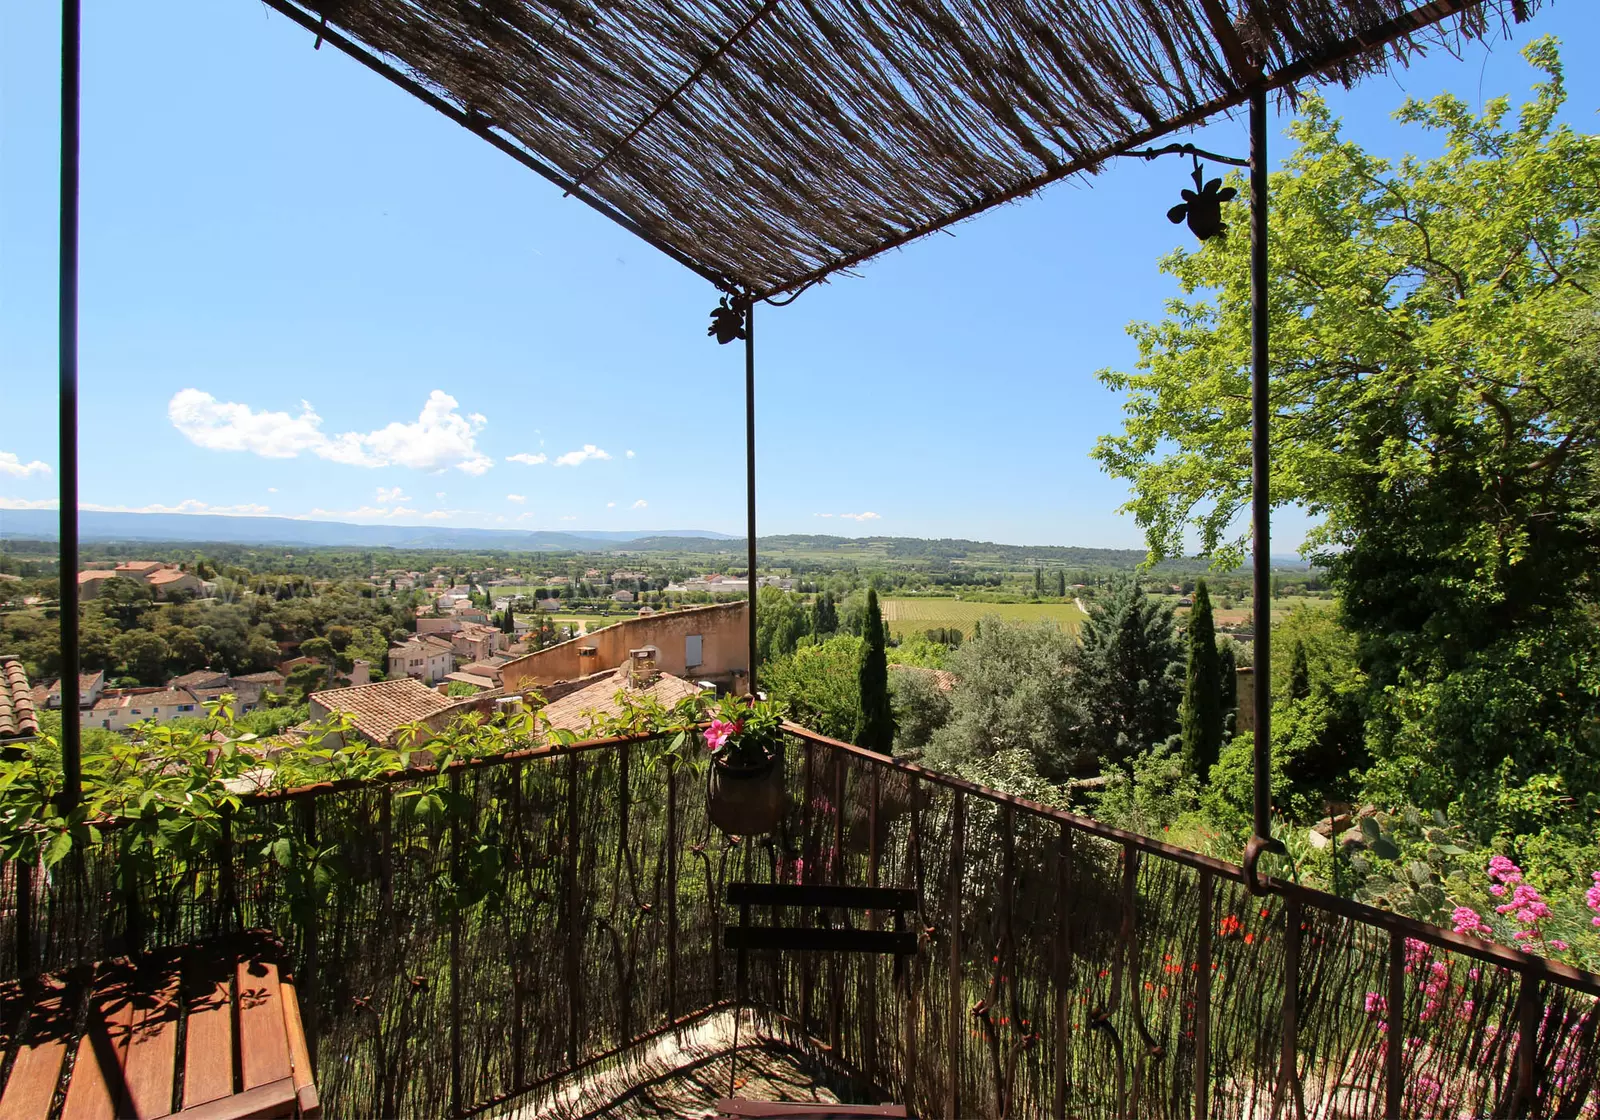 Terrace under the arbour with view over Provence